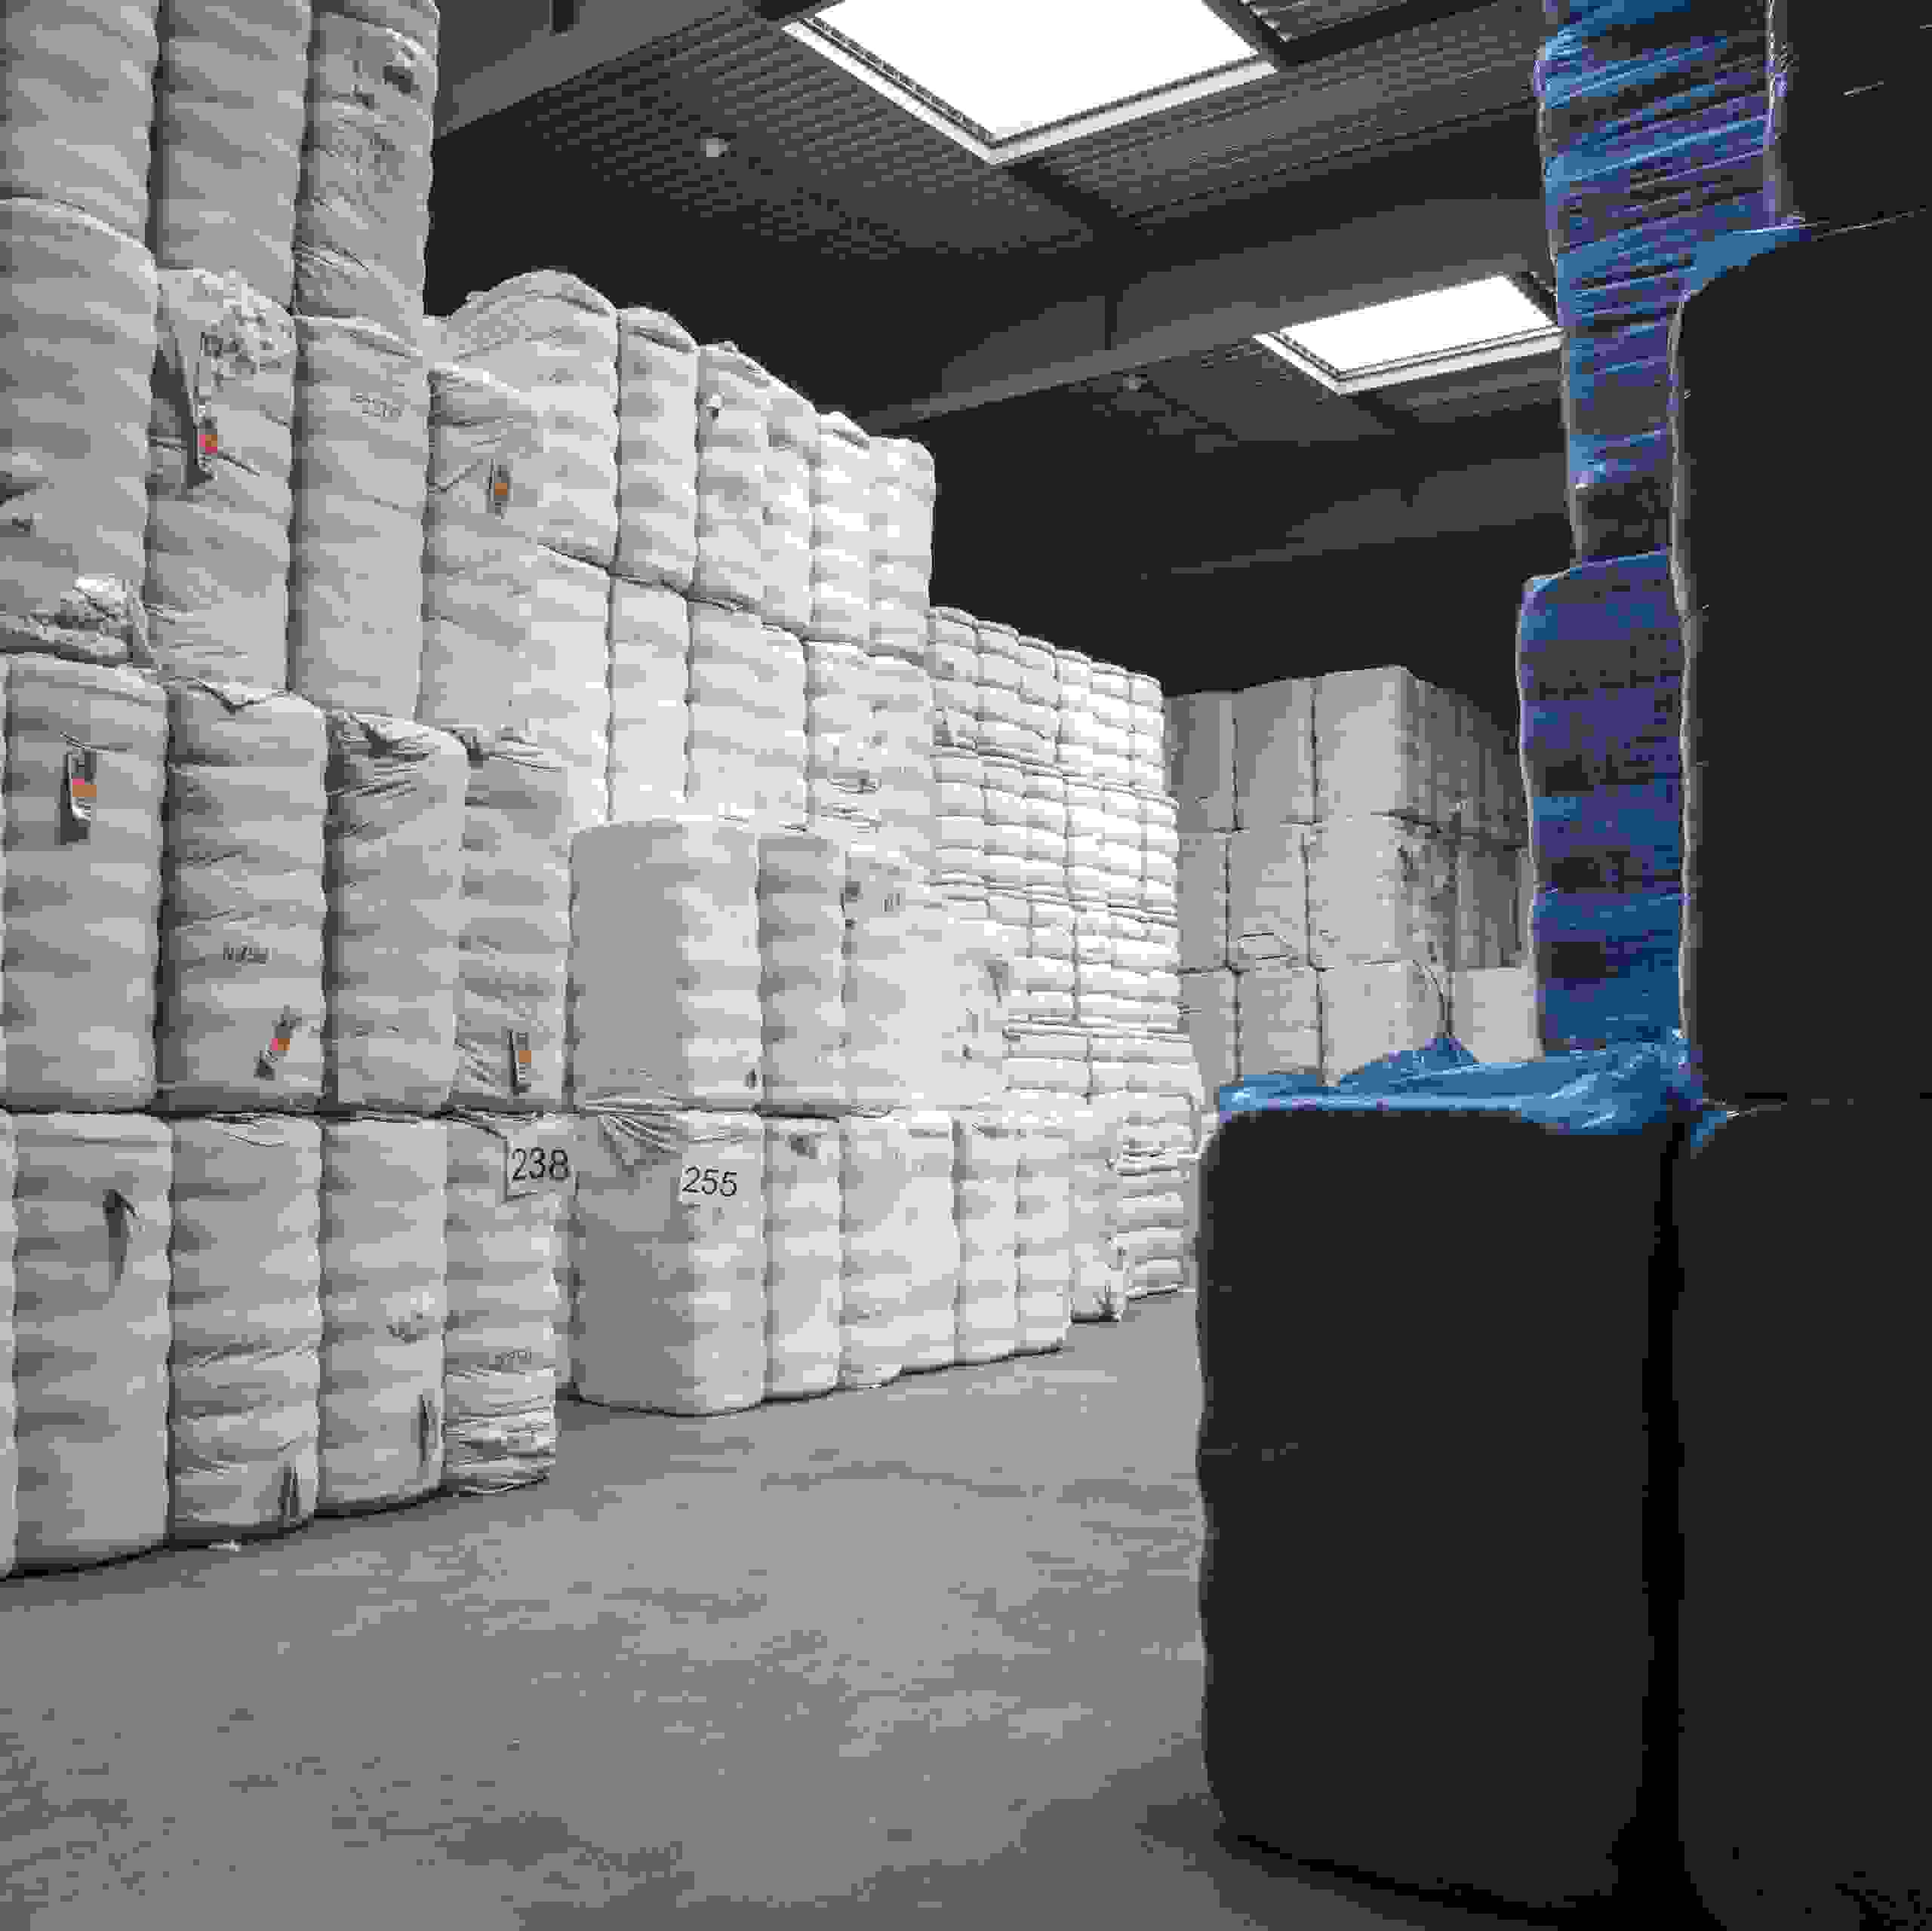 Cotton Bales Stored in Warehouse